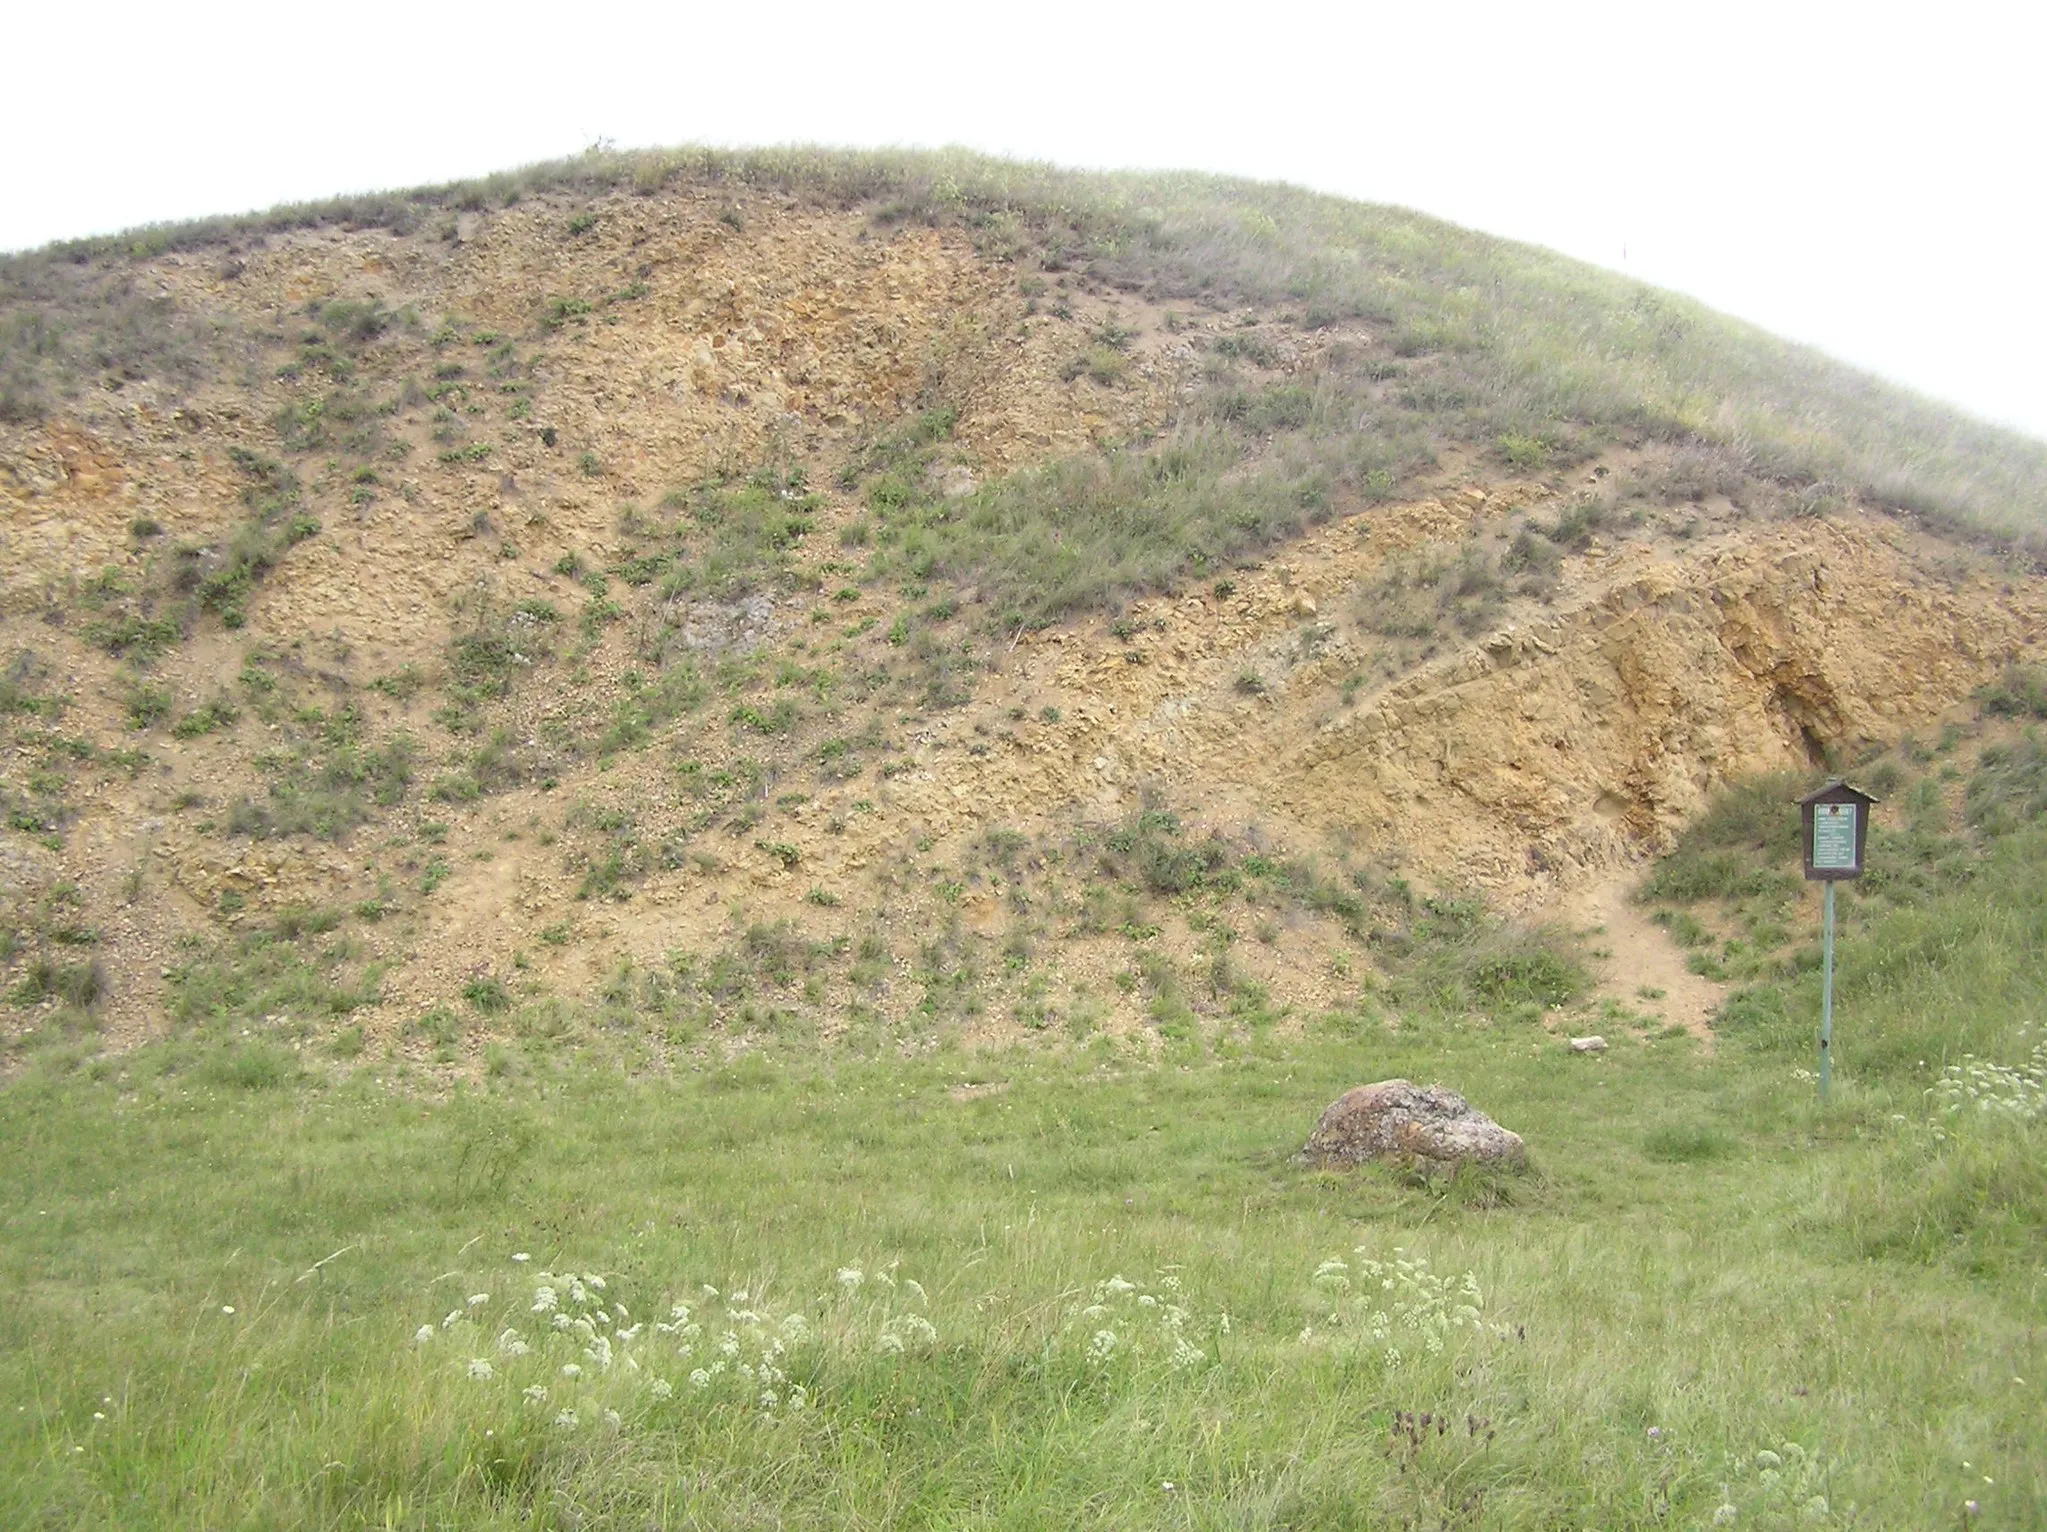 Photo showing: National natural monument Kamenná slunce (Stone suns) in Hnojnice - total view